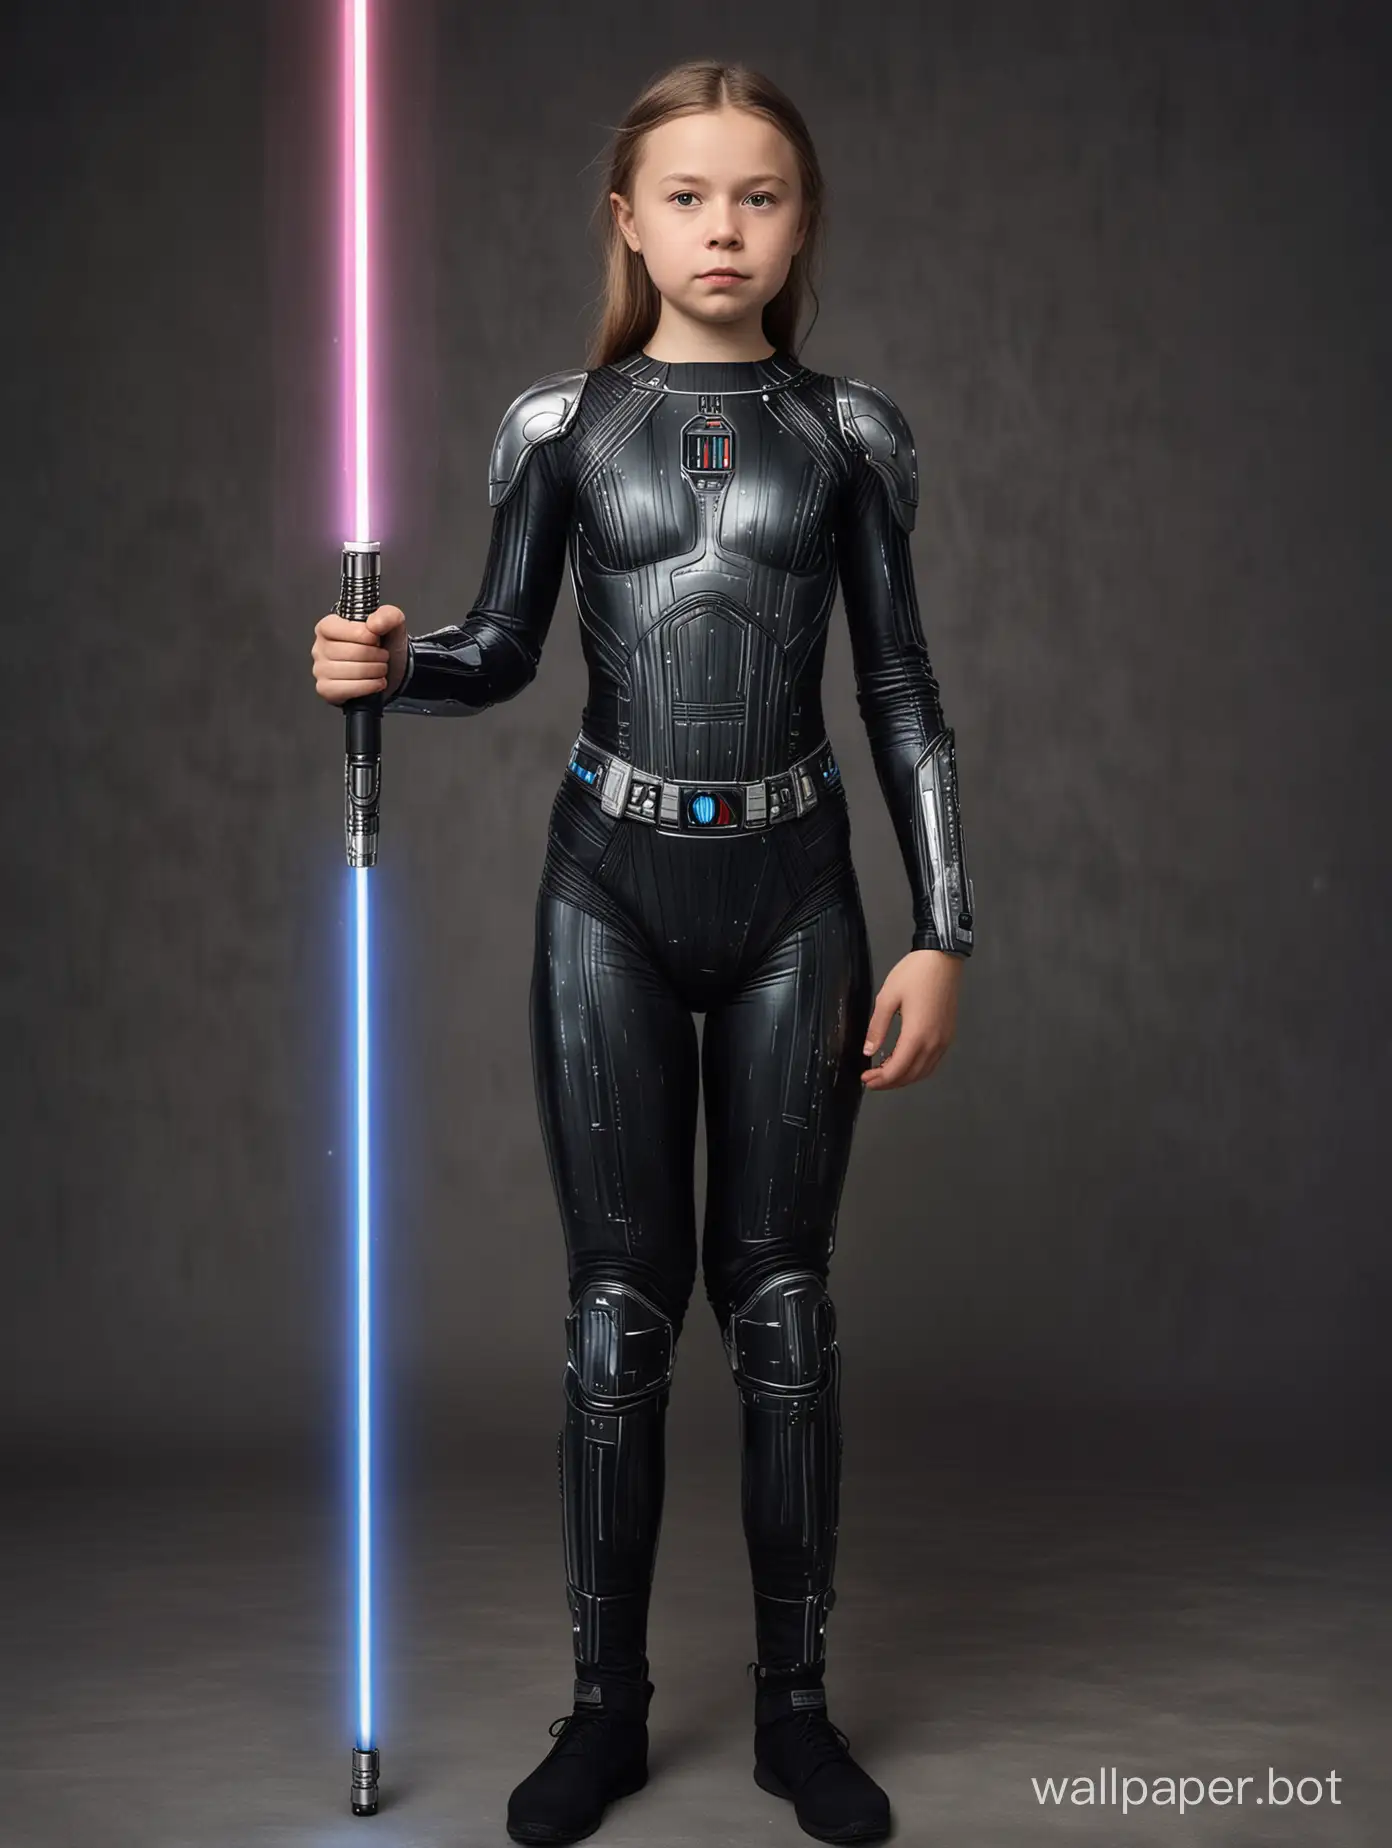 Greta Thunberg, 12 years old, in full growth in a magnificent bodysuit with a lightsaber in a distant galaxy